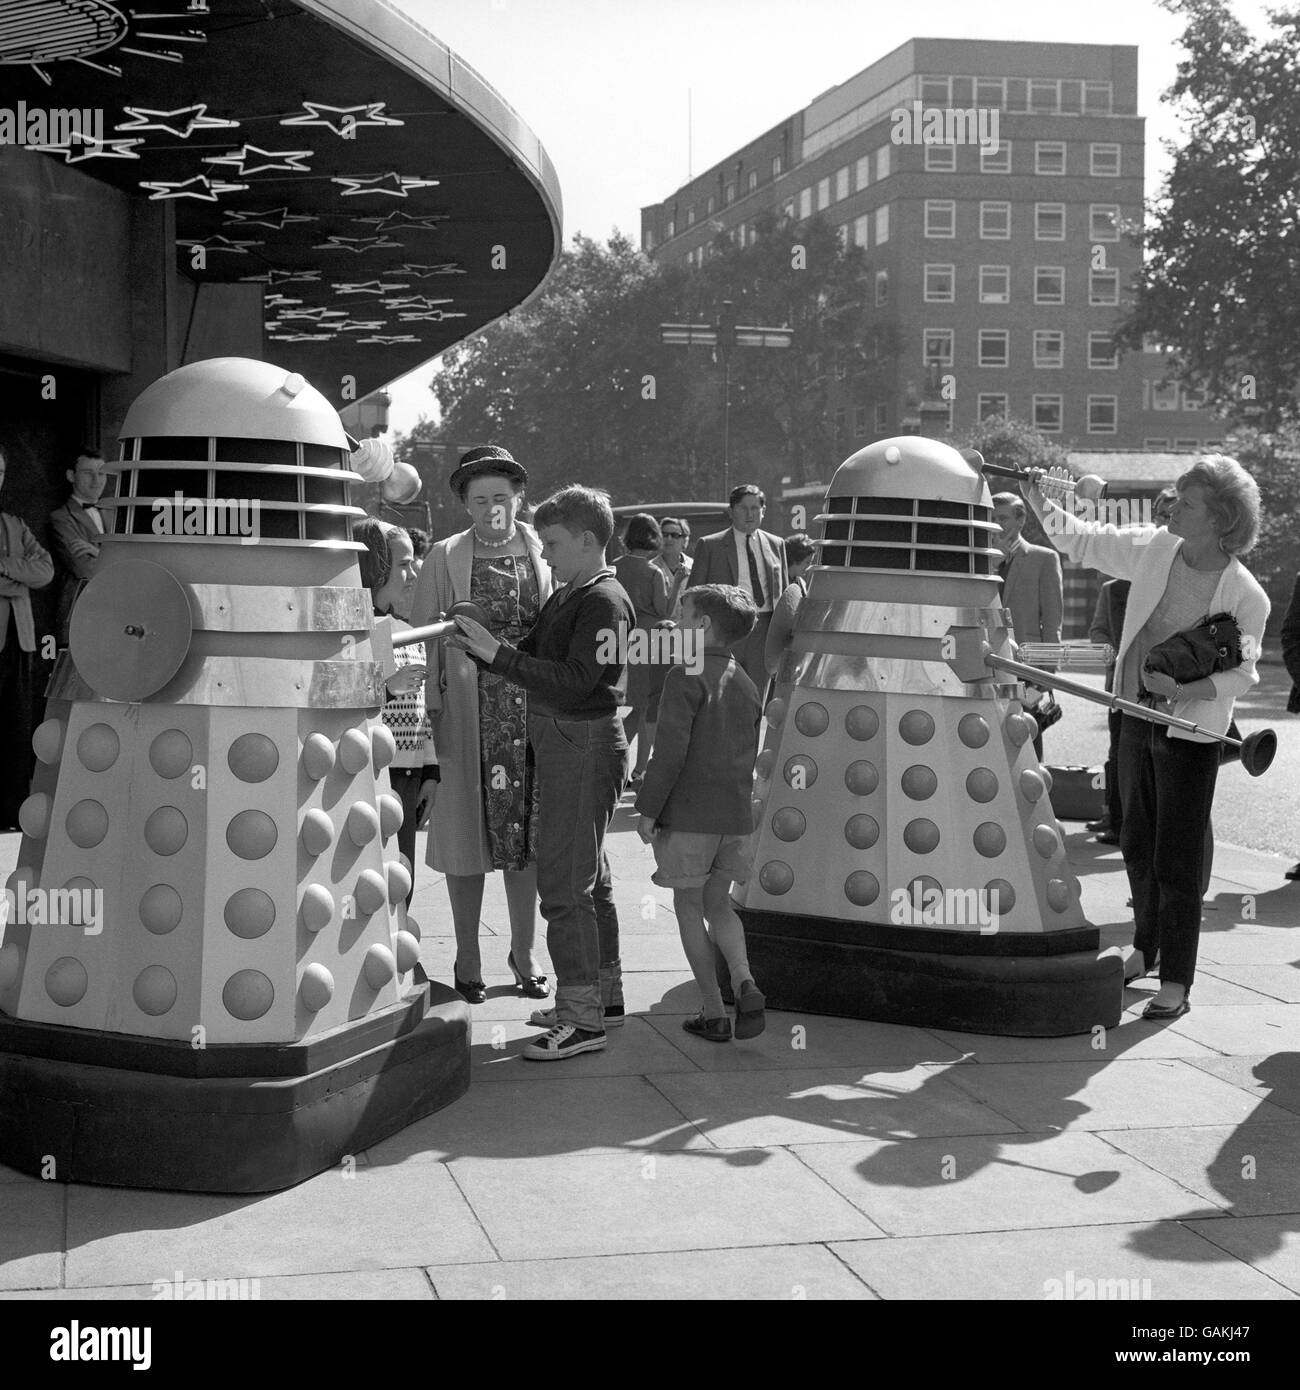 Children meeting robot Daleks outside the Planetarium, Baker Street, during location shooting for a new series. Stock Photo